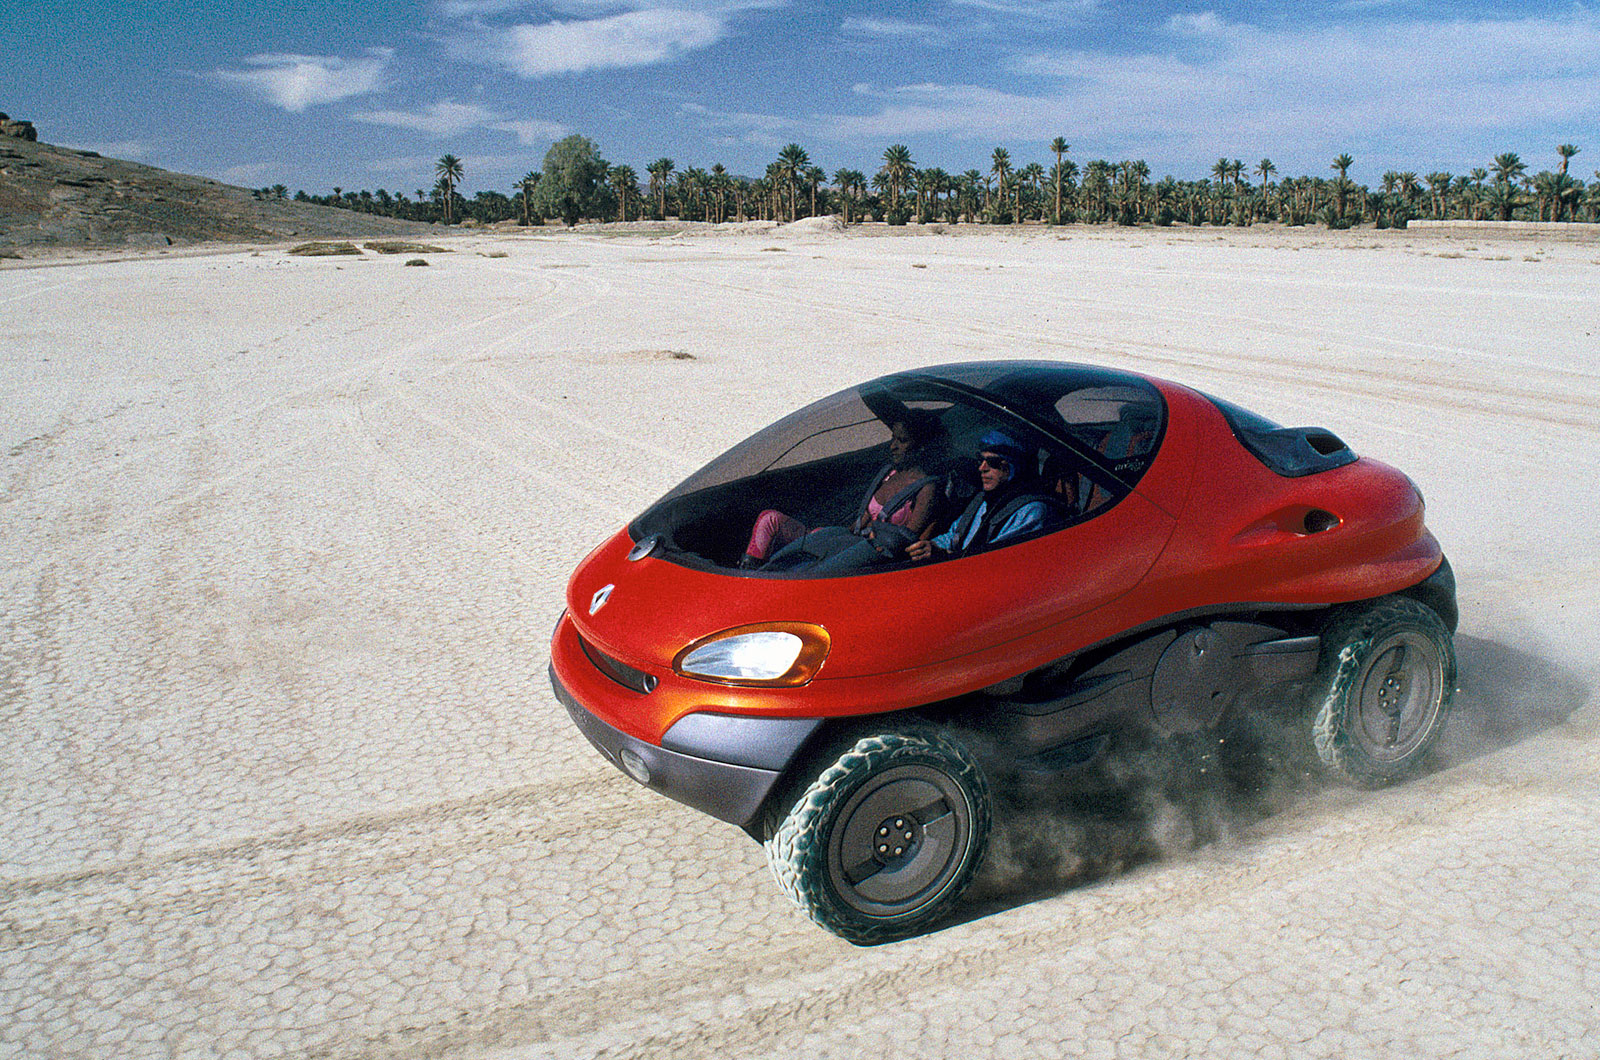 <p>Renault churned out concept cars throughout the 1980s and 1990s, many of which were so wacky that you had to wonder what they'd been smoking. One of the most ridiculous was the three-seater Racoon, which was claimed to be watertight, fire-proof and was height-adjustable.</p><p>A Safrane-sourced 266 hp V6 engine drove all four wheels via a six-sped transmission but incredibly, nothing like the Racoon has entered production. So far.</p>